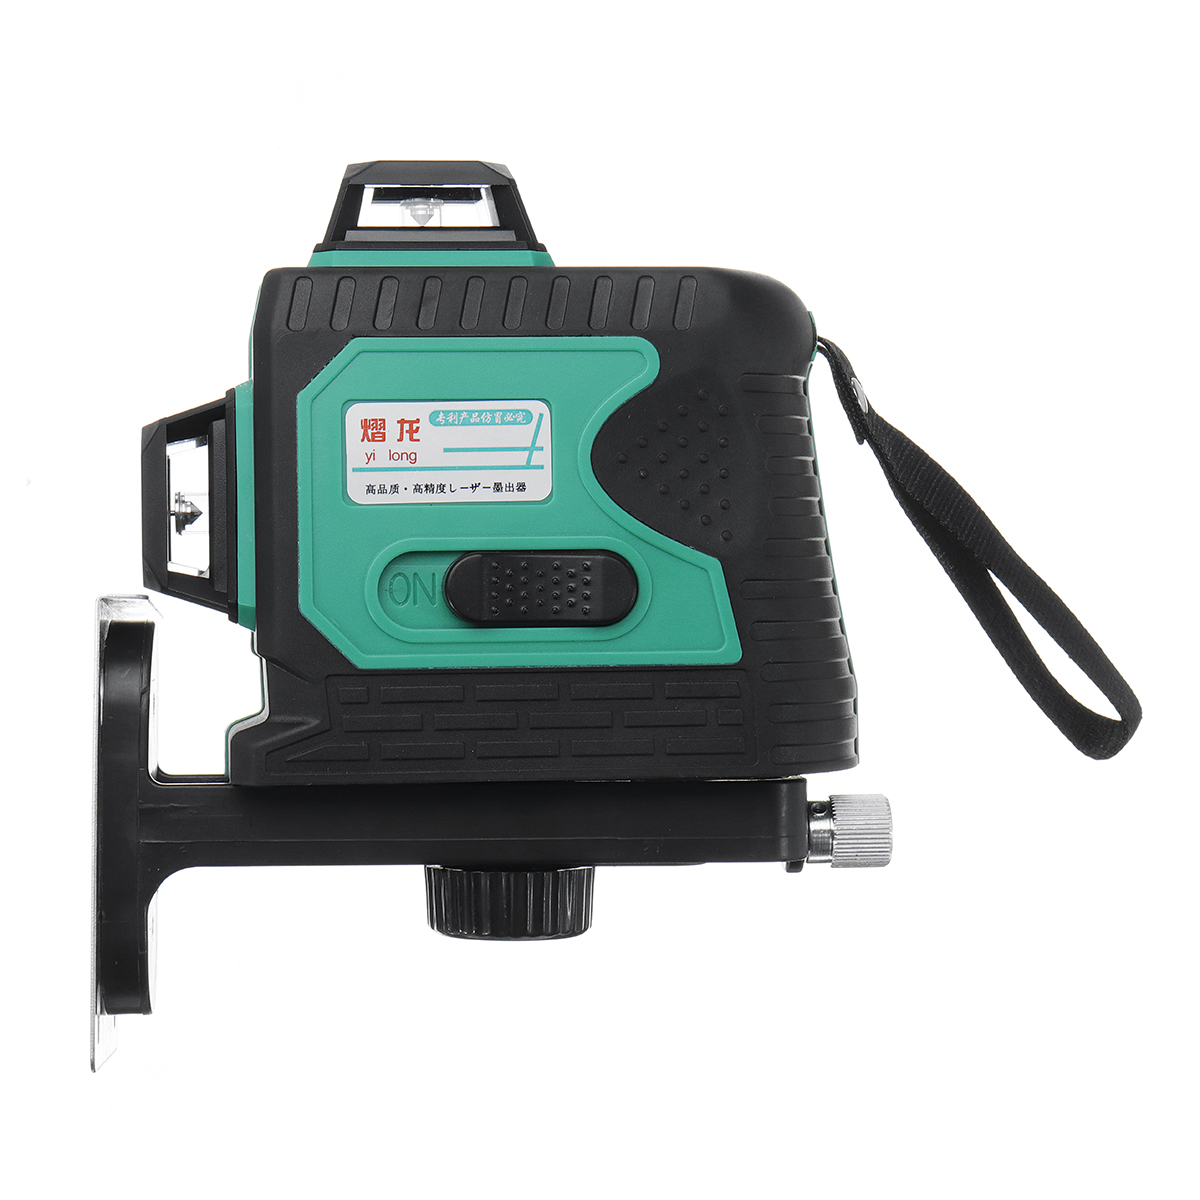 Blue-green-Light-12-line-Outdoor-Strong-Laser-Level-Infrared-Light-High-precision-Automatic-1445383-2